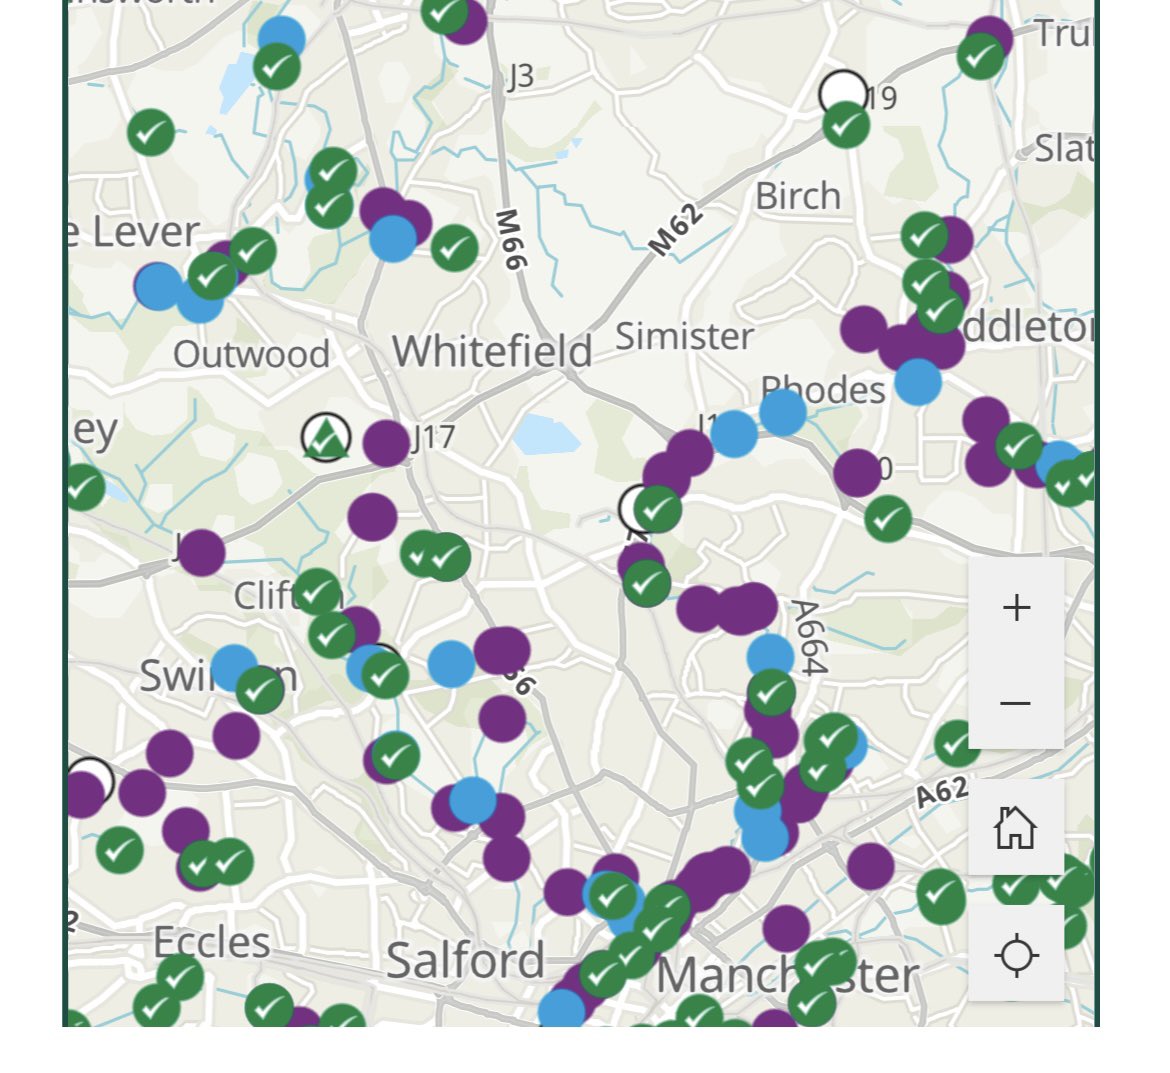 Lots of overflows currently discharging sewage into Manchester’s rivers. Check out the online map here unitedutilities.com/better-rivers/… Interesting choice of blue by @unitedutilities to represent a sewage dump💩 Purple indicates a discharge in the last 24 hours.